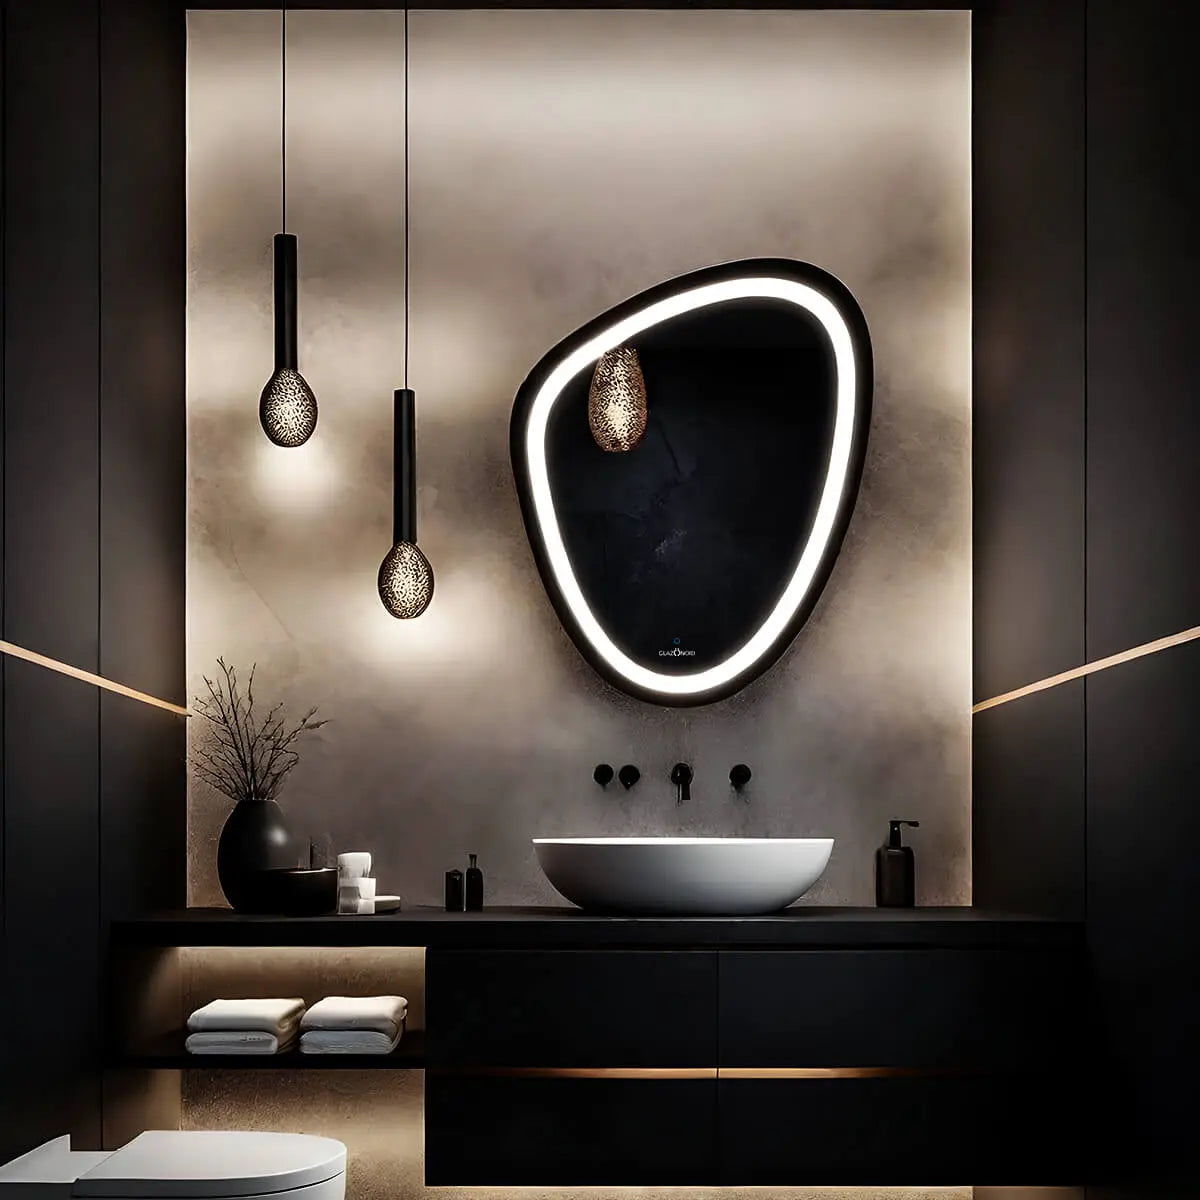 A bathroom LED mirror with a built-in digital clock icon. The time on the clock displays 11:59 PM. The LED mirror is placed on a textured wall, over a white ceramic sink and black marble vanity.